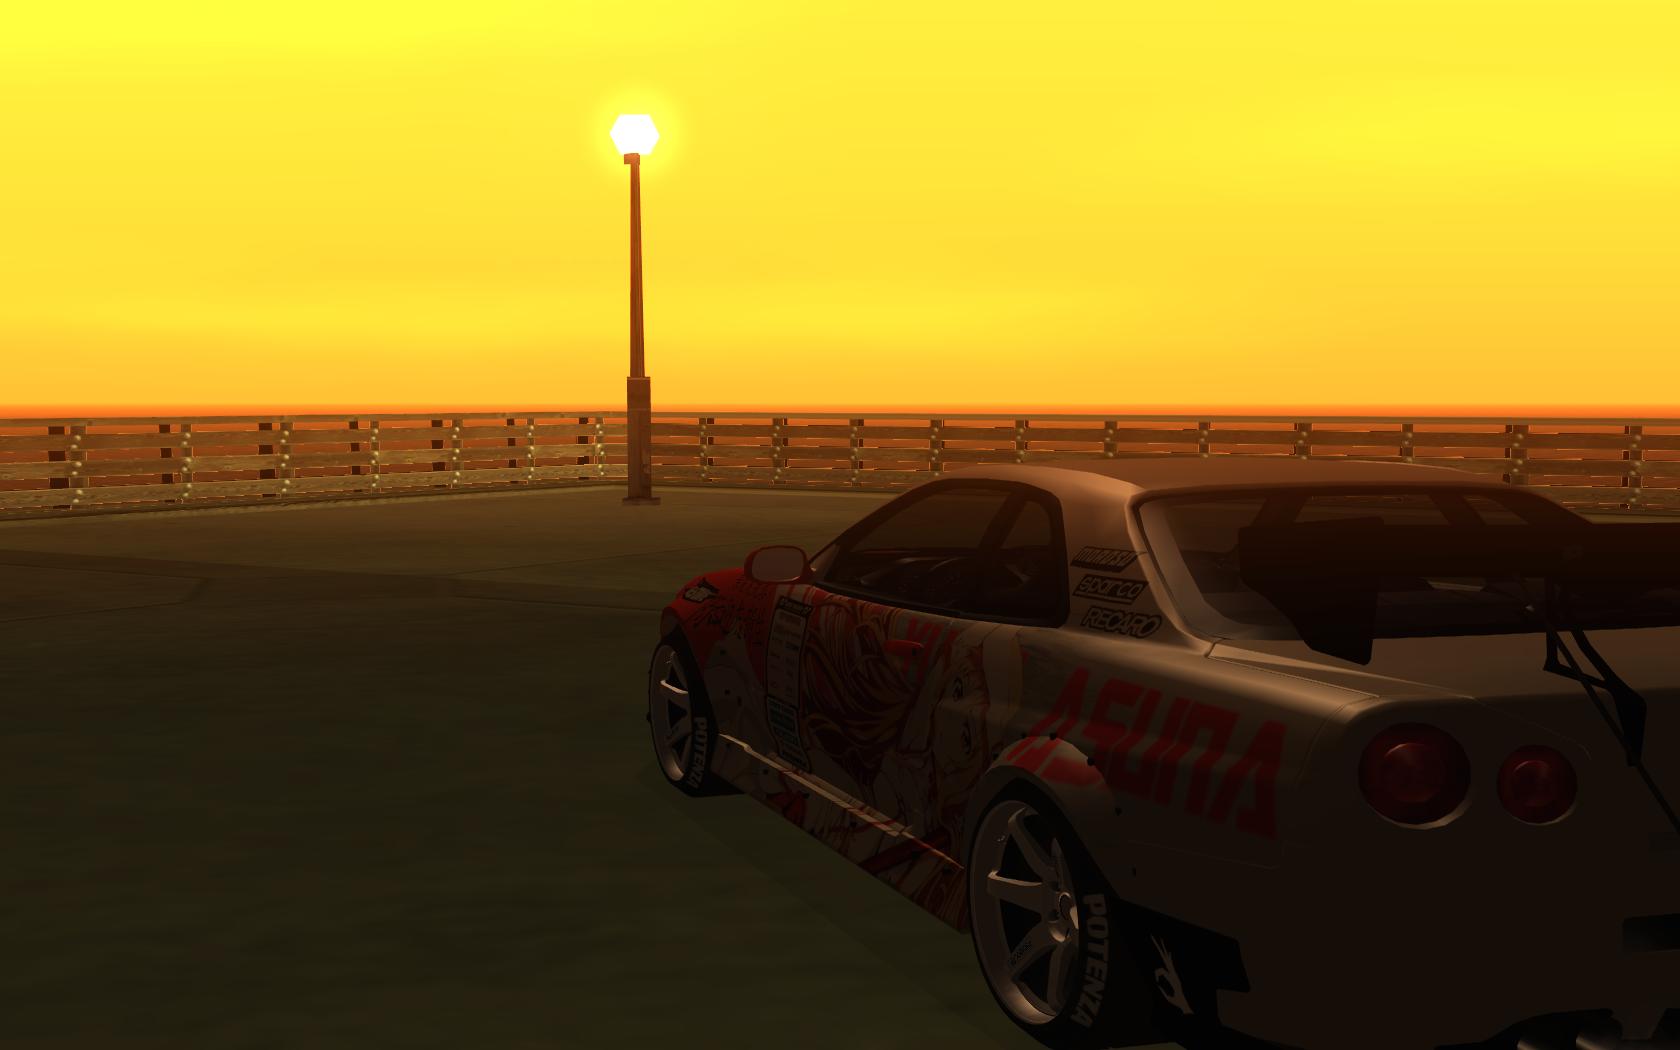 Nissan, Skyline, Skyline R34, Nissan Skyline GT R R34, GT R, Tuning, Cargame, Grand Theft Auto, San Andreas Wallpaper